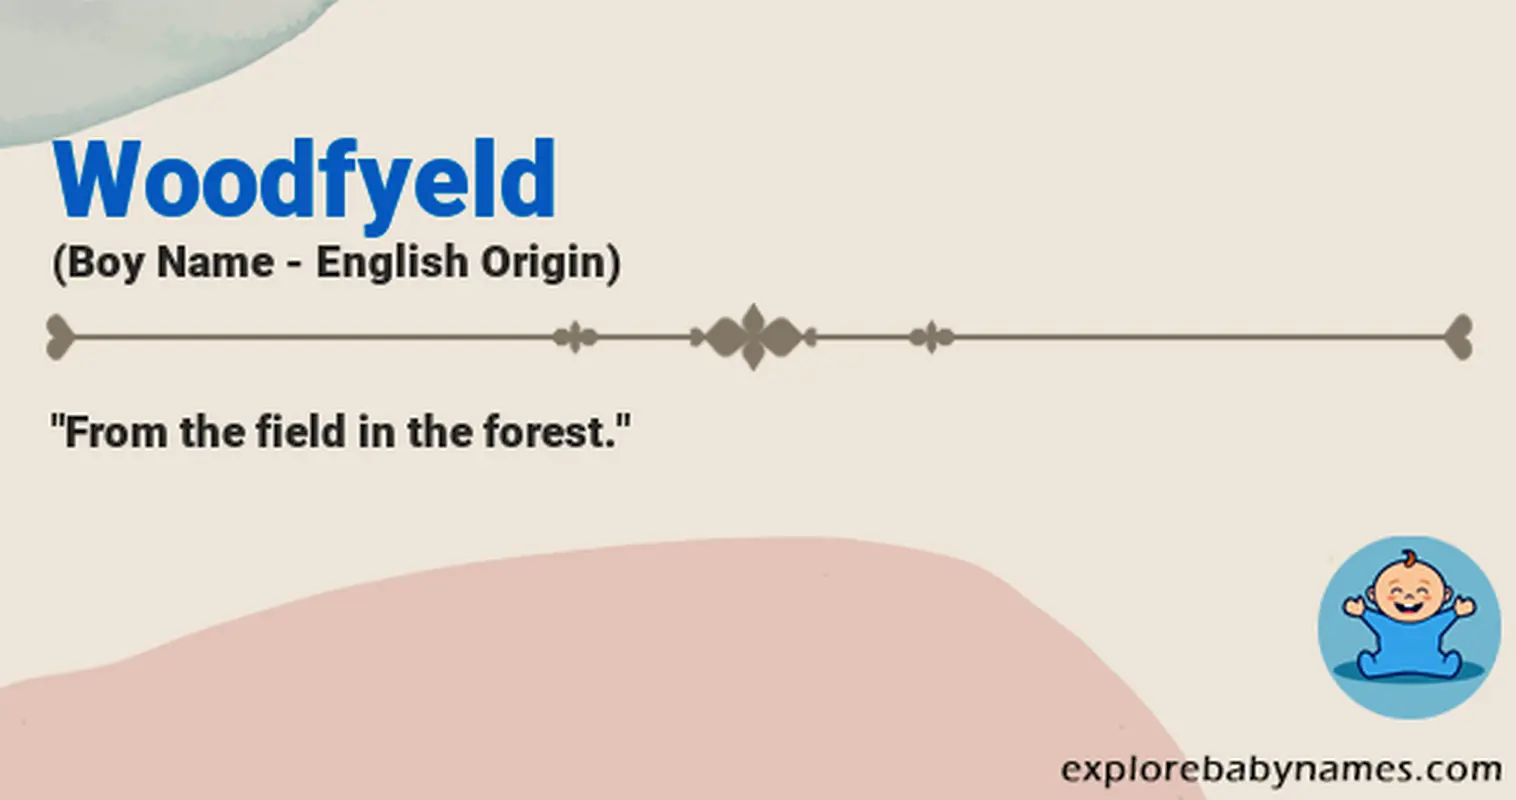 Meaning of Woodfyeld